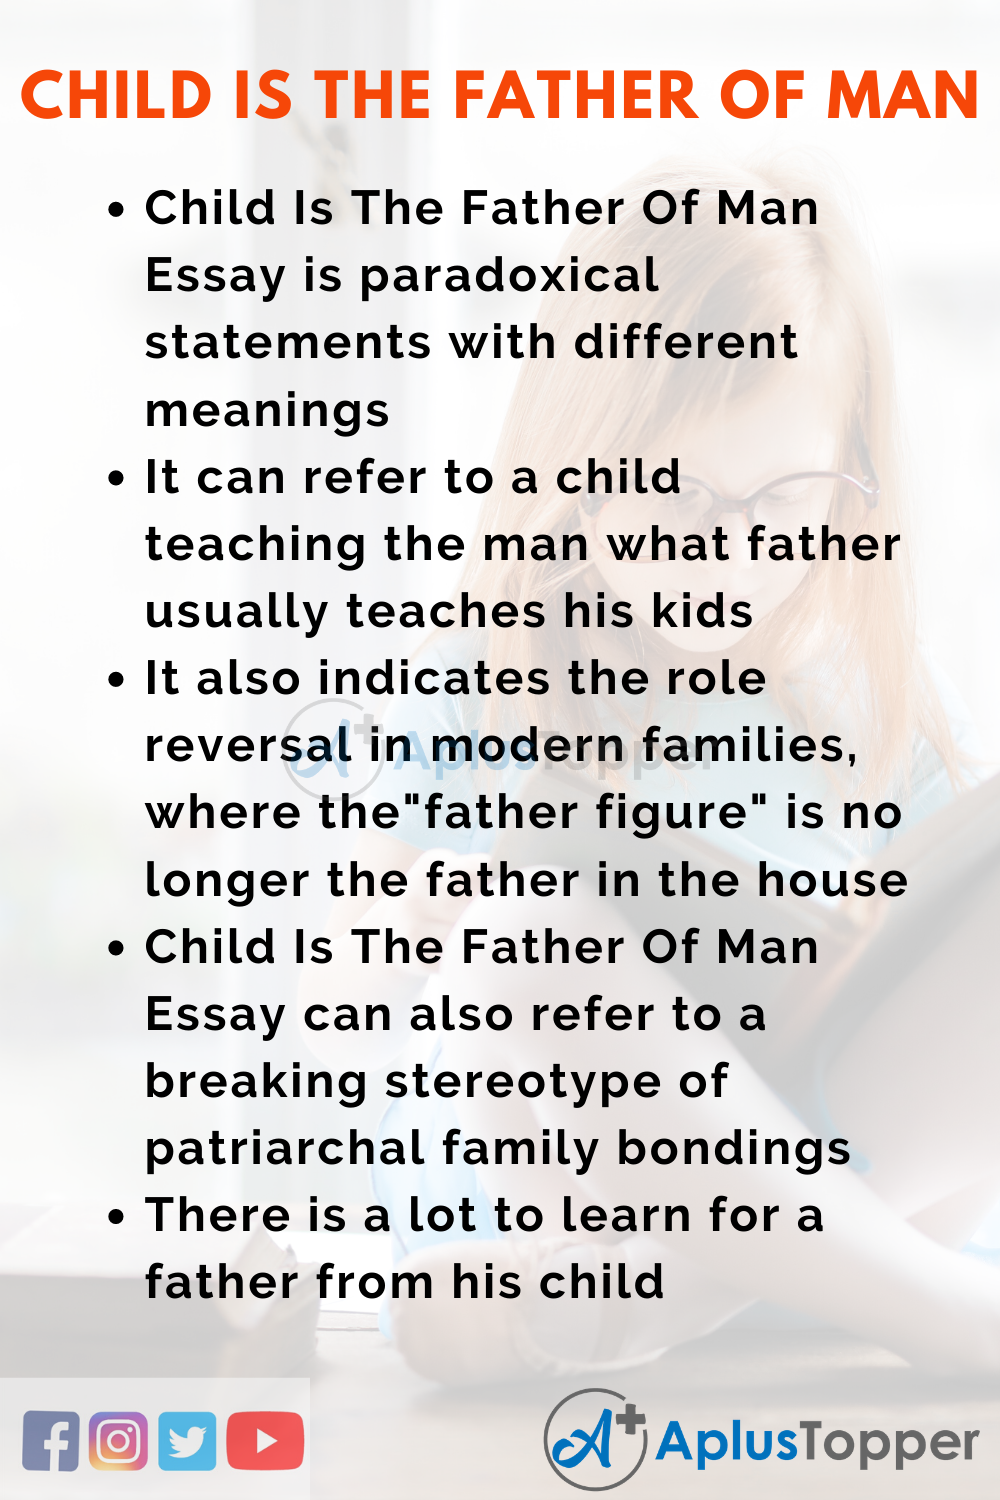 child is the father of man essay in 200 words